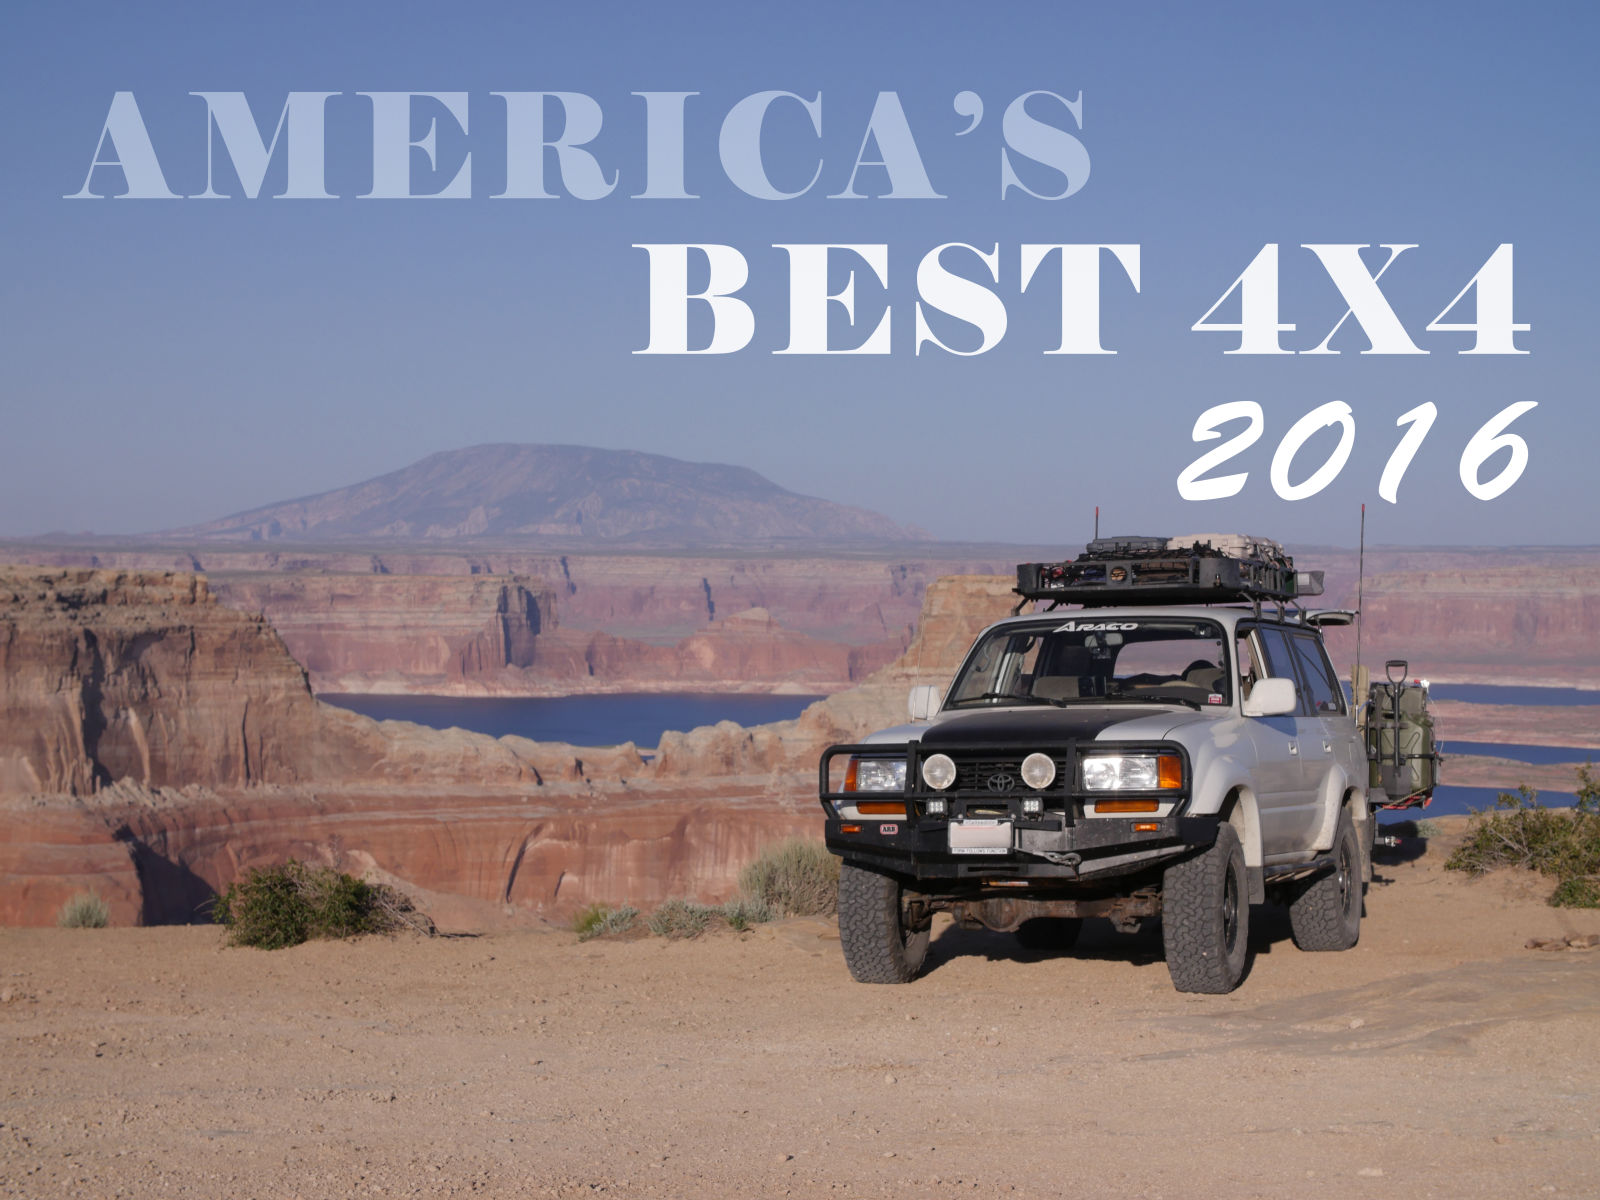 Illustration for article titled Americas Best Overland Vehicle - 2016 [Update]